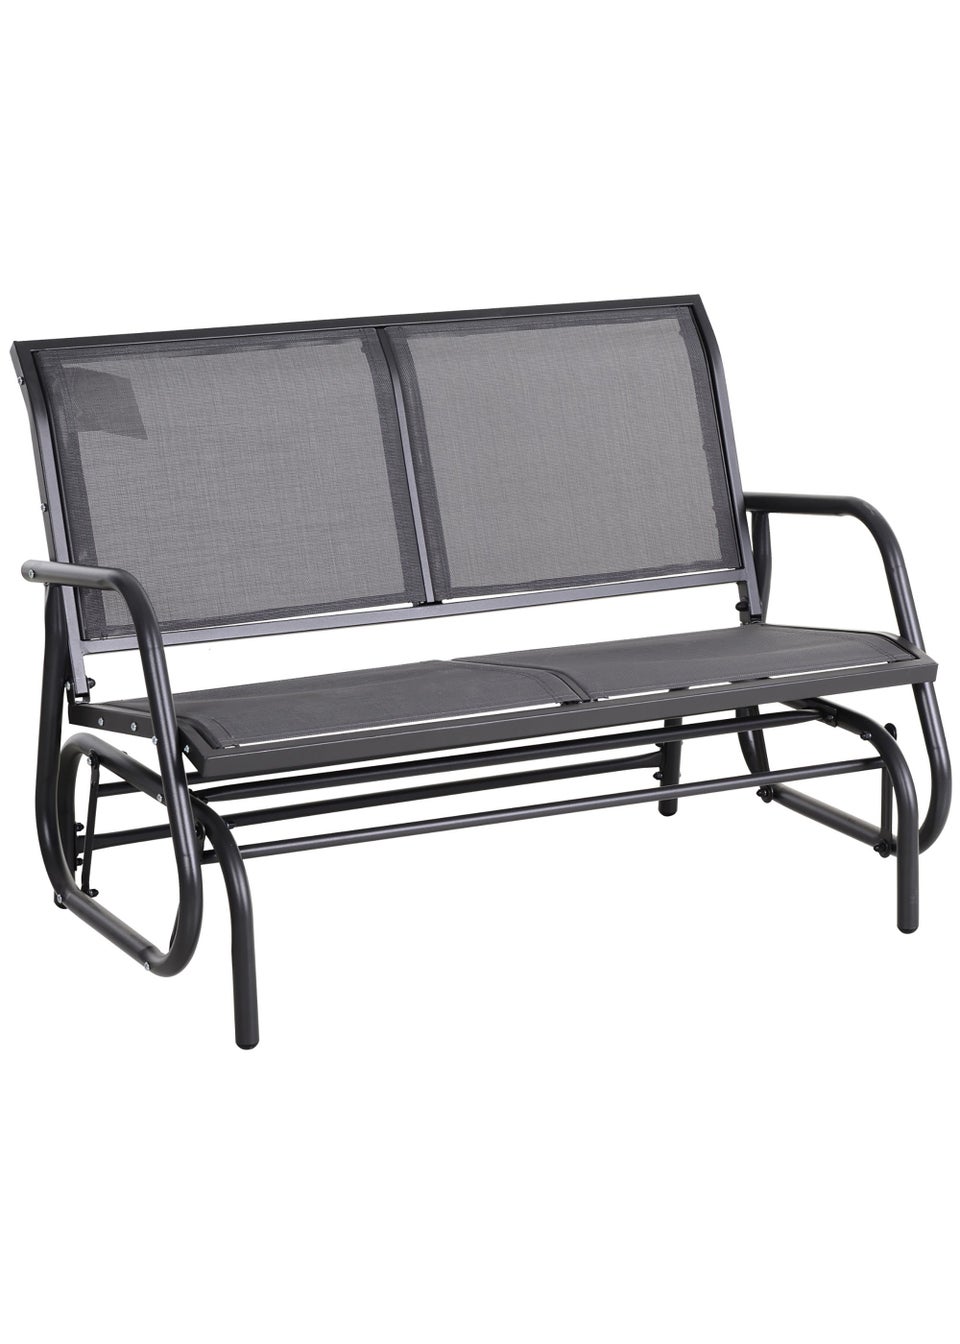 Outsunny 2 Person Glider Bench Swing